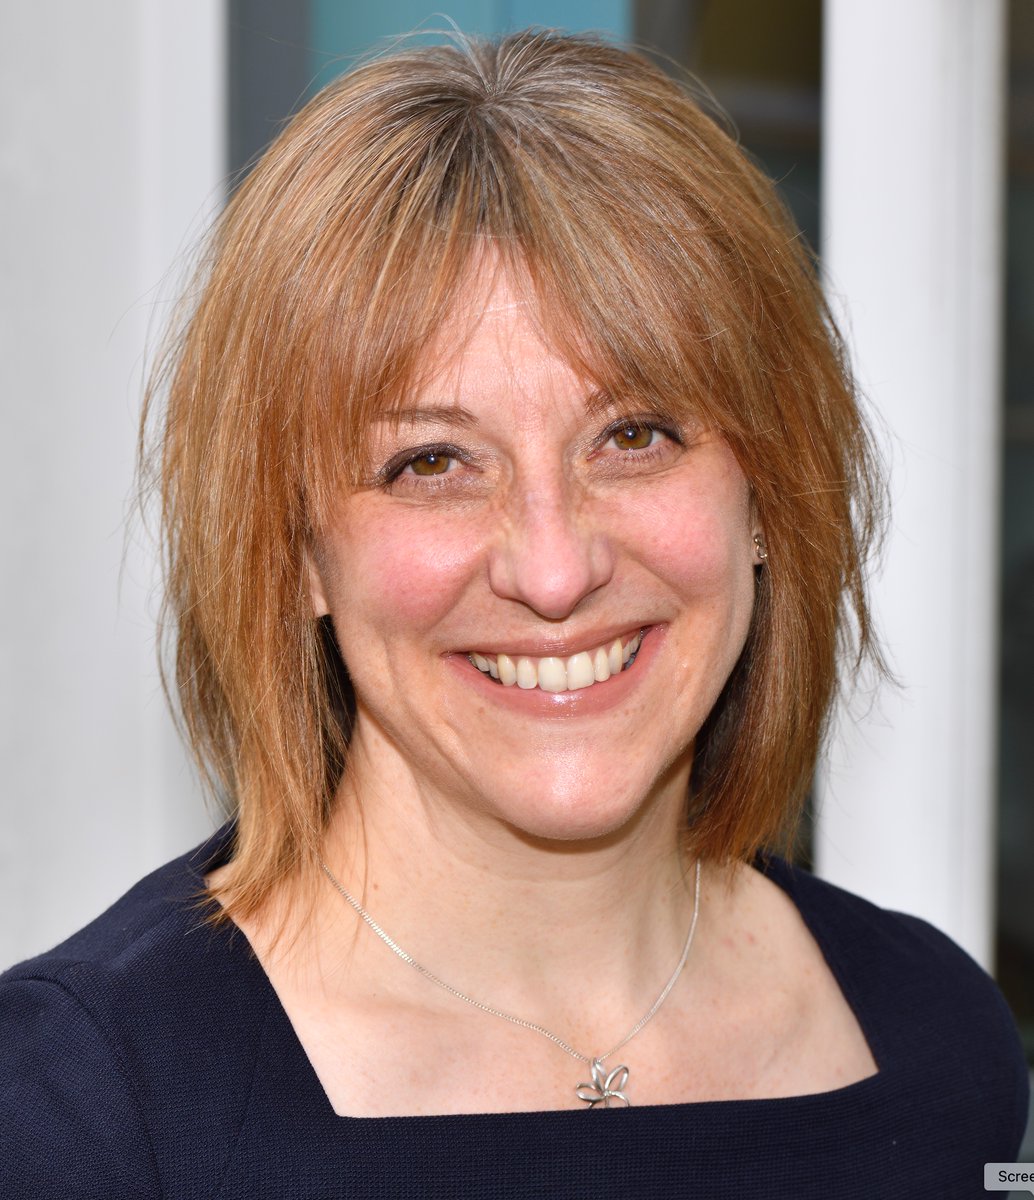 Join us at Dyspnea 2024 for Dr. Rachael Evan’s keynote presentation titled “Breathlessness Management Services in the Primary Care Setting of the United Kingdom.” Dr. Evans is an Associate Professor at the University of Leicester, UK. Register today! dyspneasociety.org